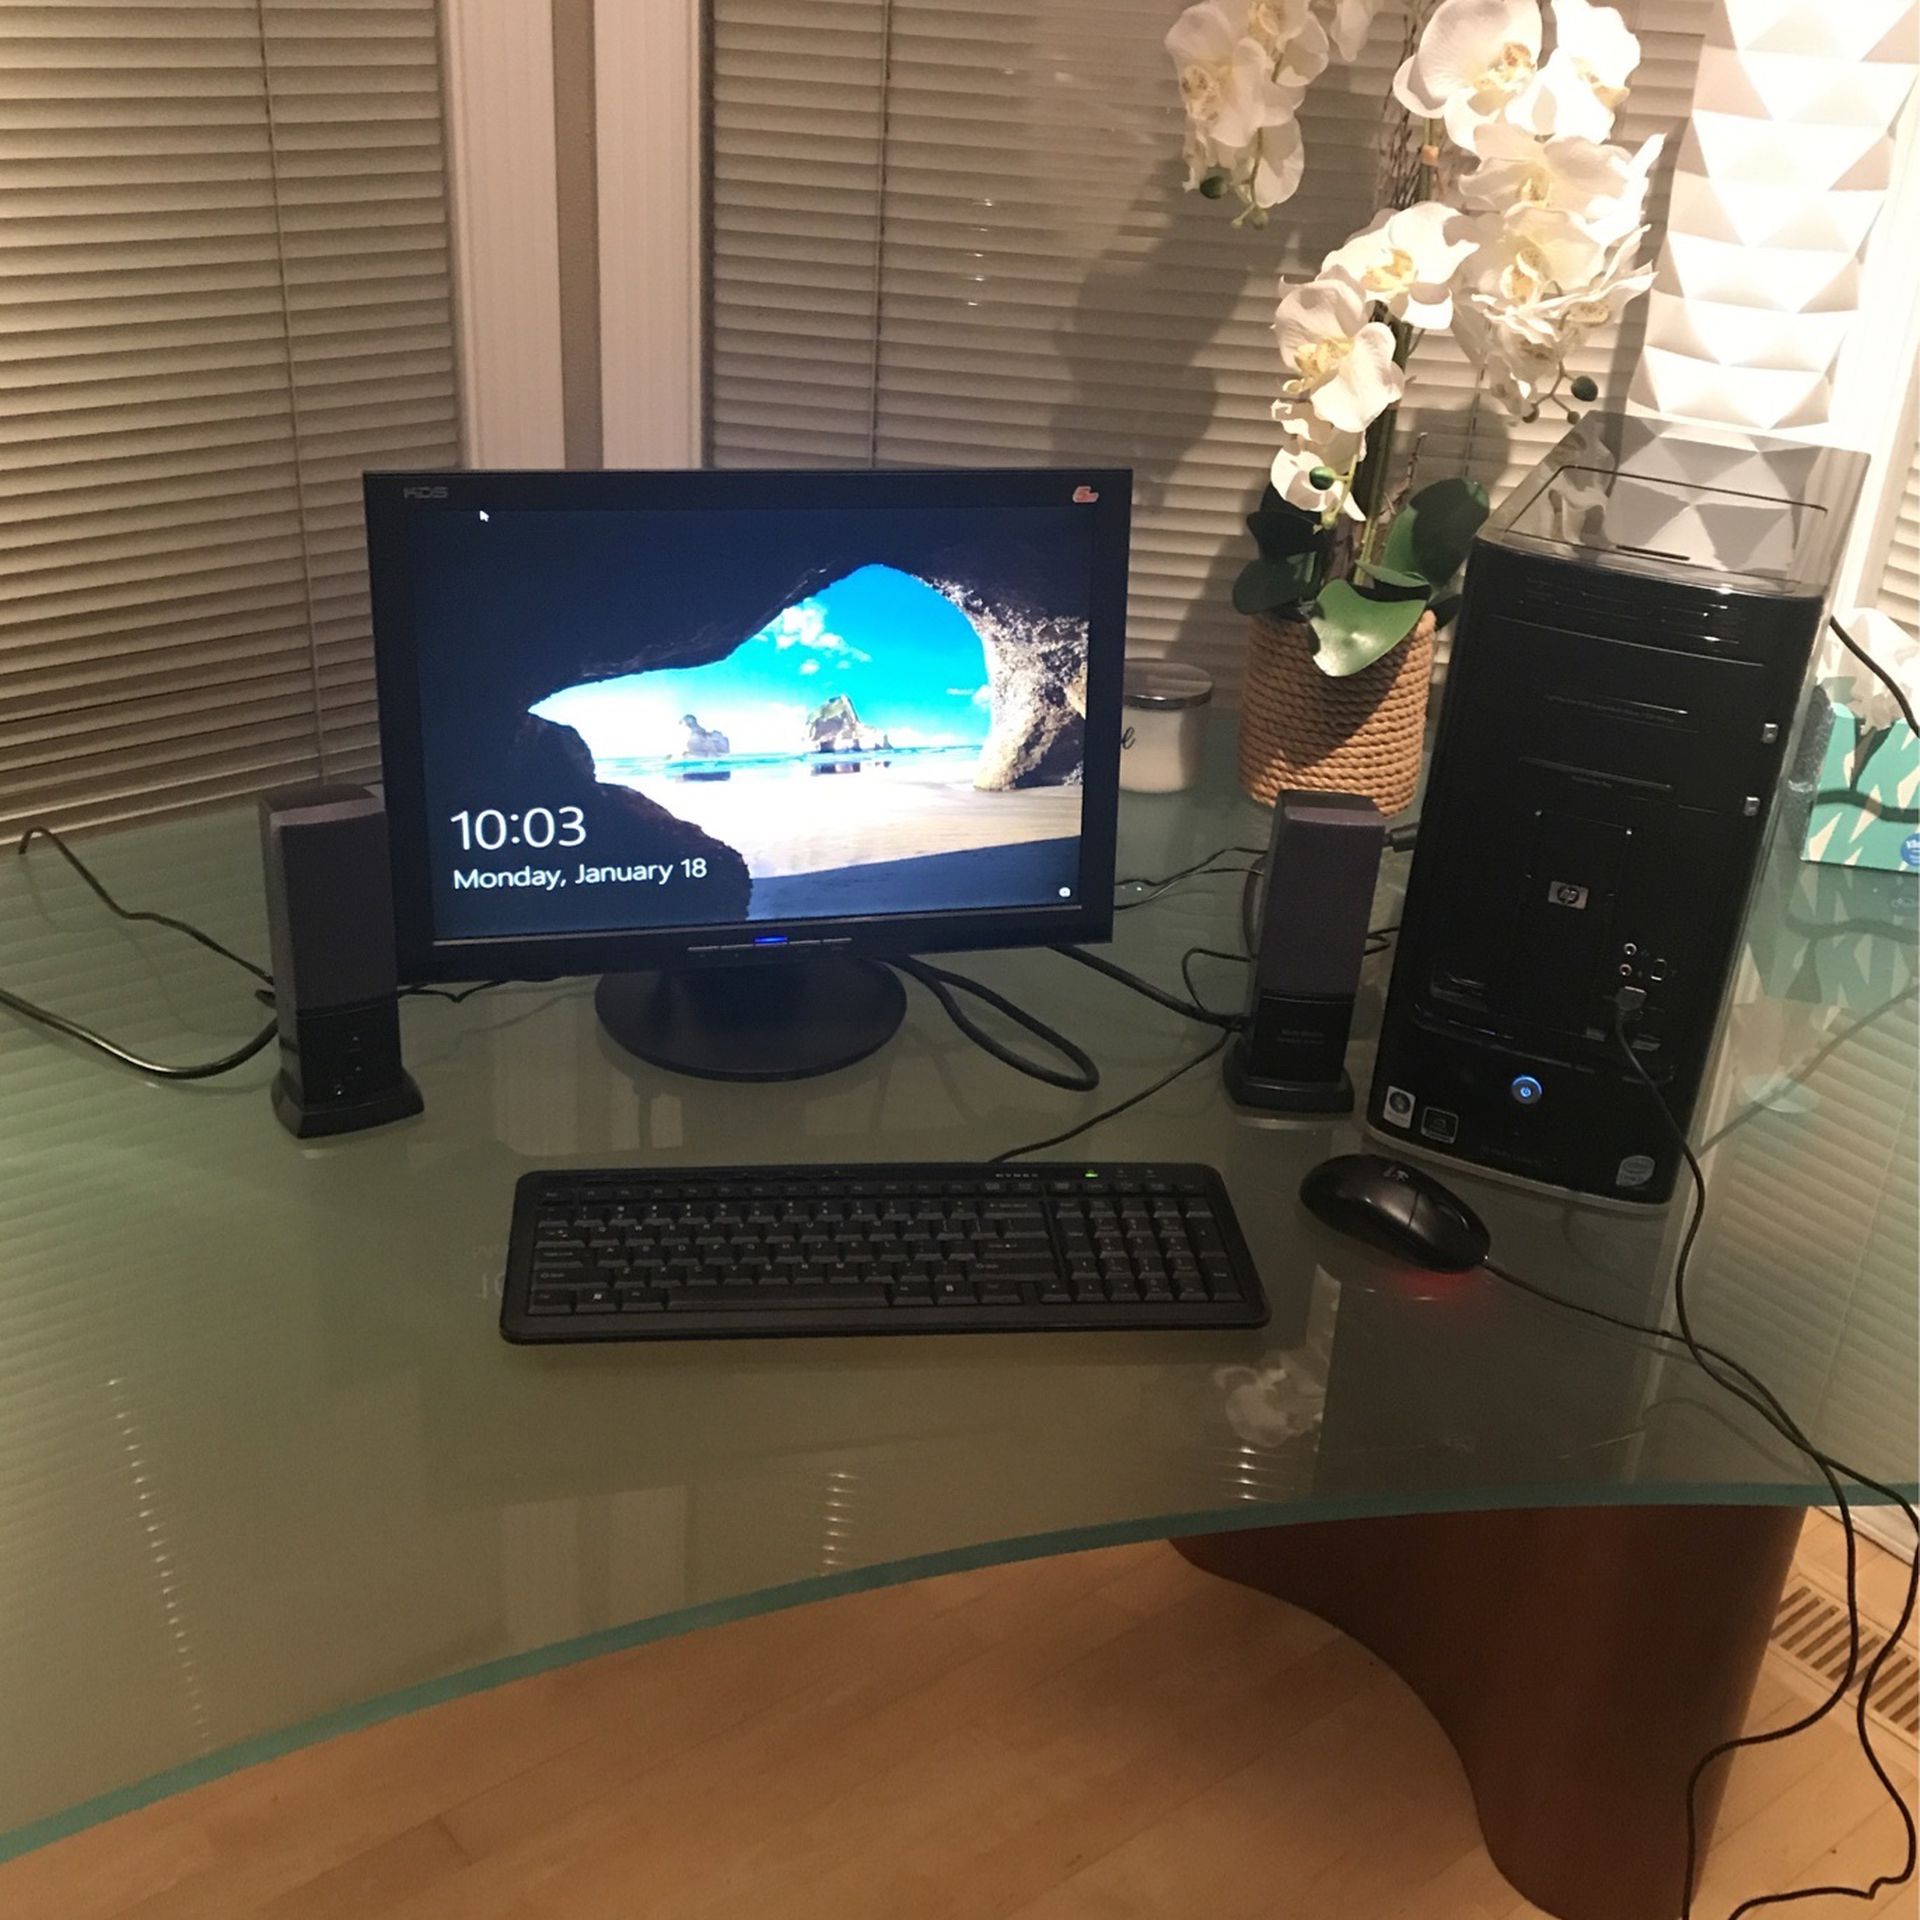 HP Tower, KDS Monitor, Dynex Keyboard, Logitech Mouse & Speakers